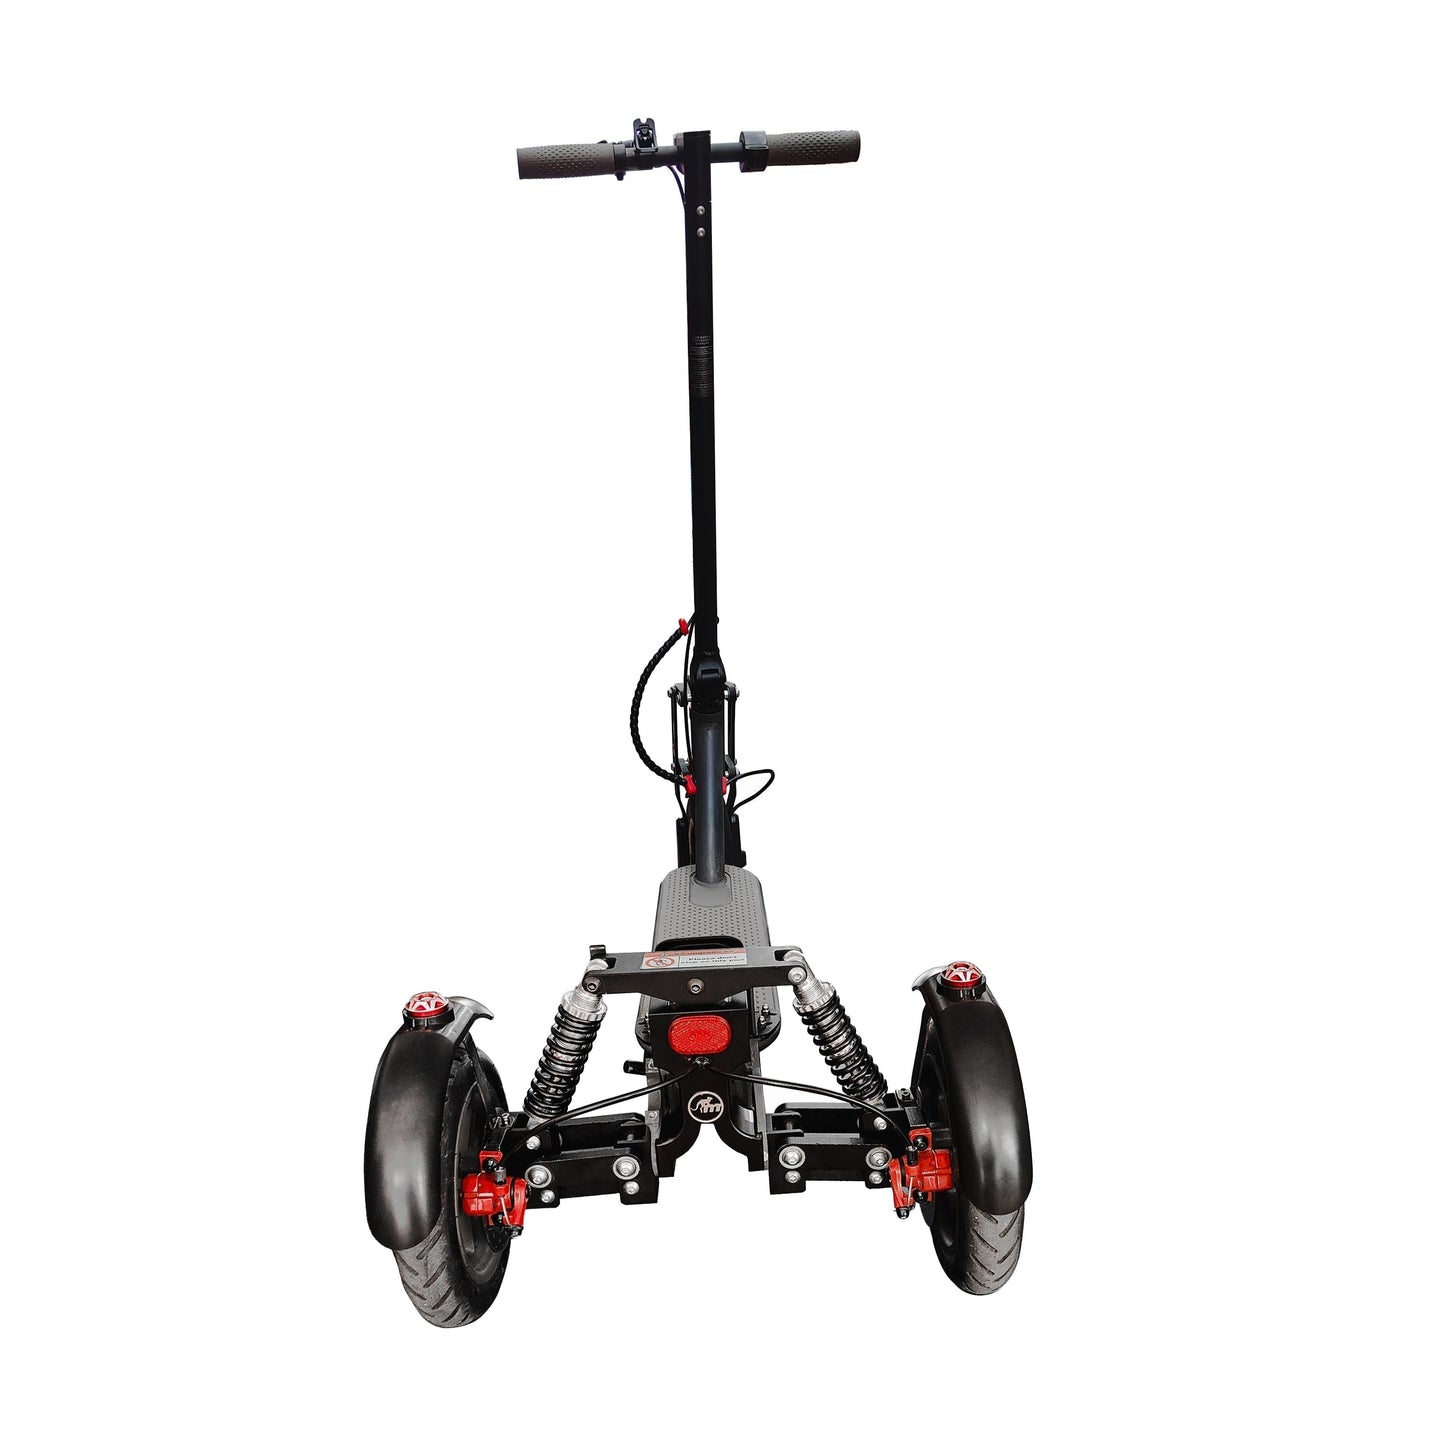 Monorim X3 upgrade kit to be Three wheels special for ks4 Scooter